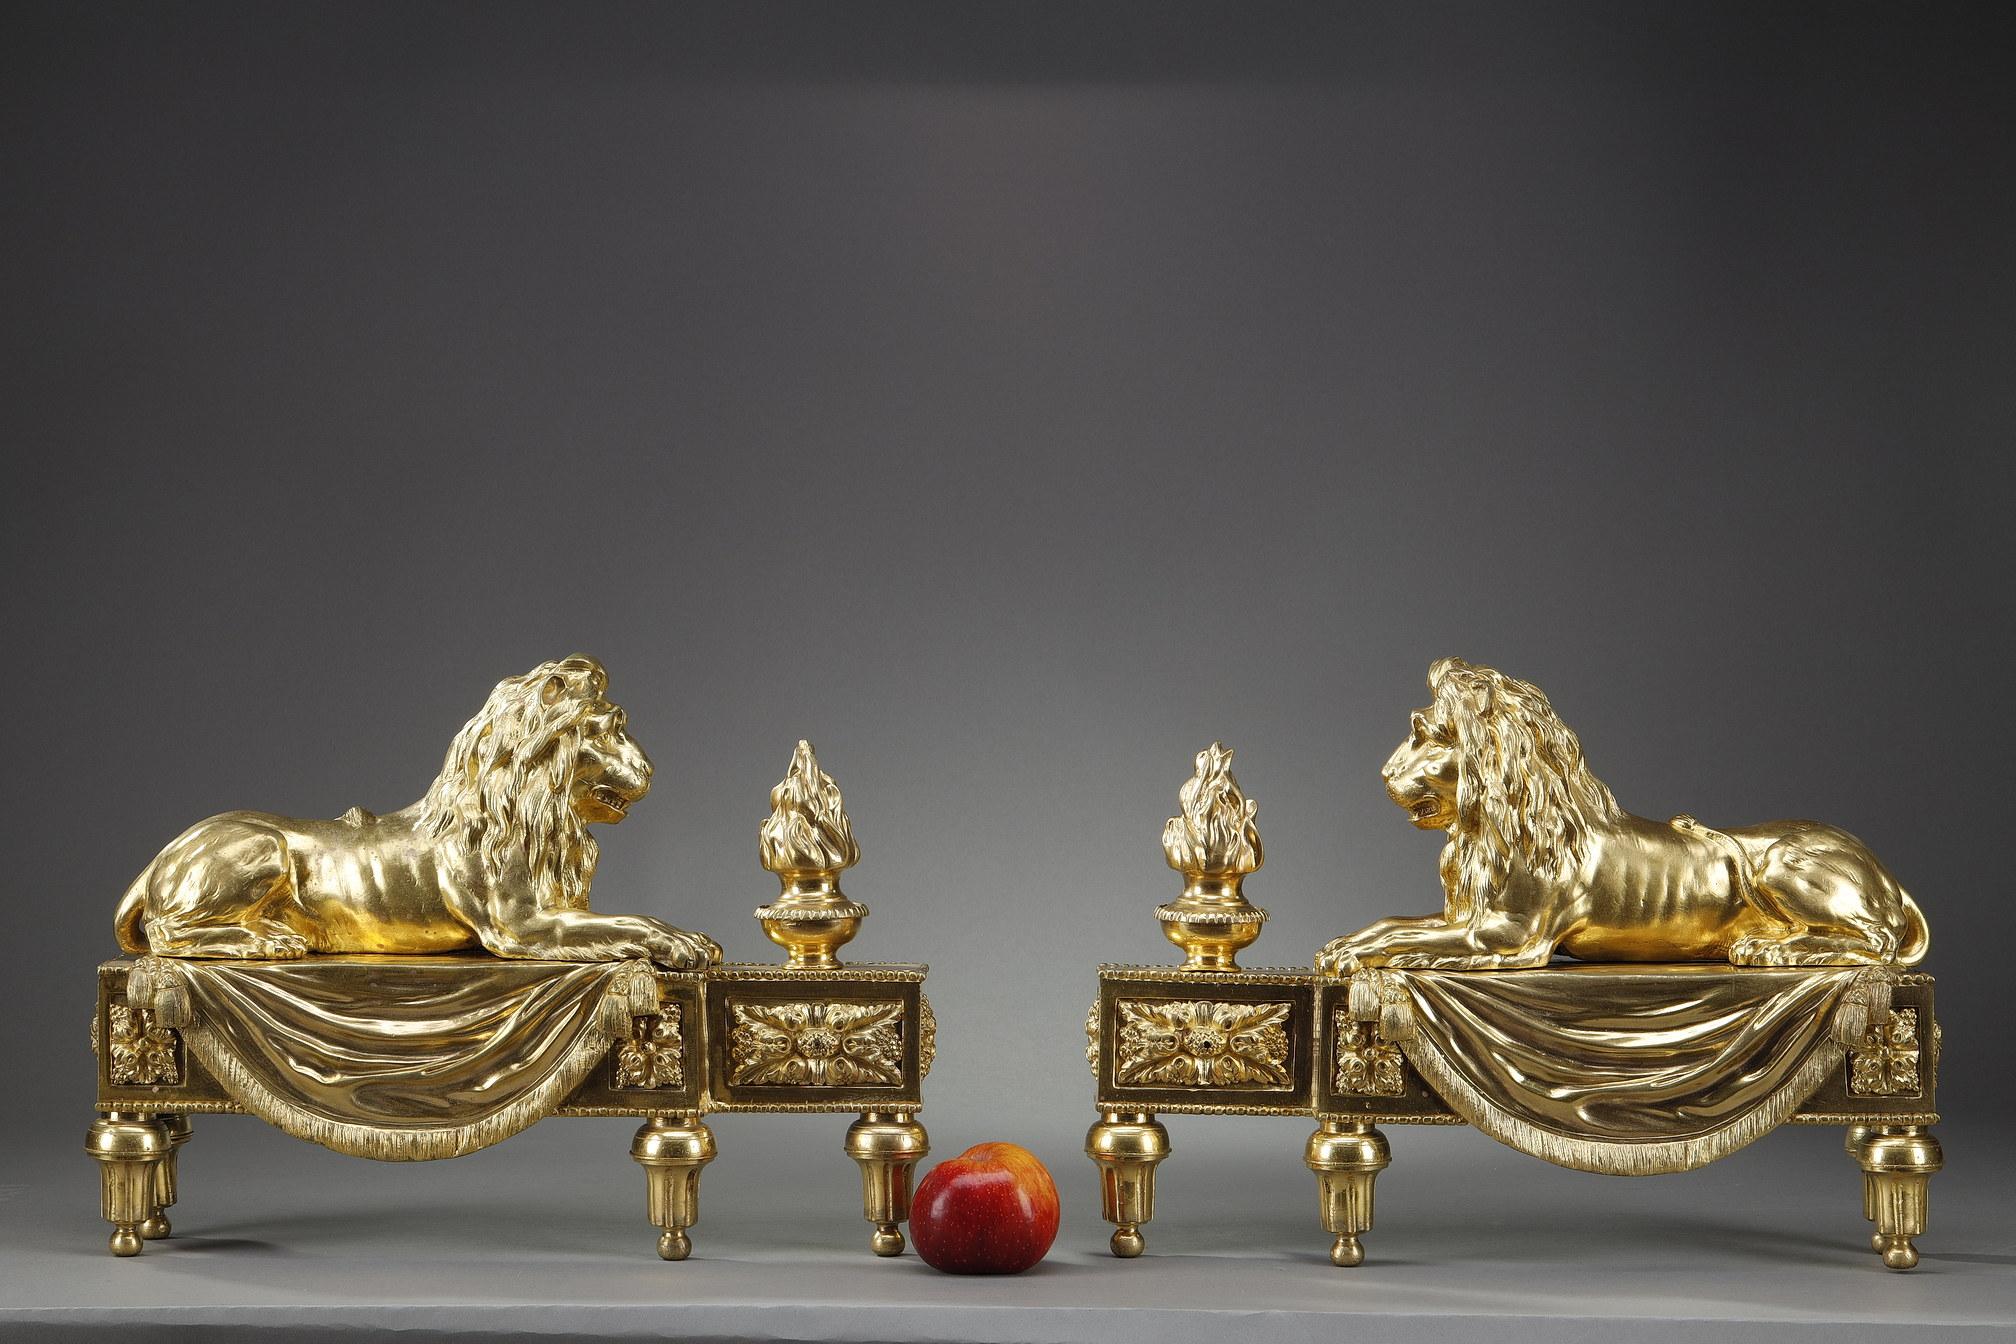 Large pair of gilt and finely chiselled bronze andirons in the Louis XVI style. They are surmounted by laying lions on a drape decorated with trimmings facing fire pots. The animals are very well worked with nervous limbs, detailed manes and exposed